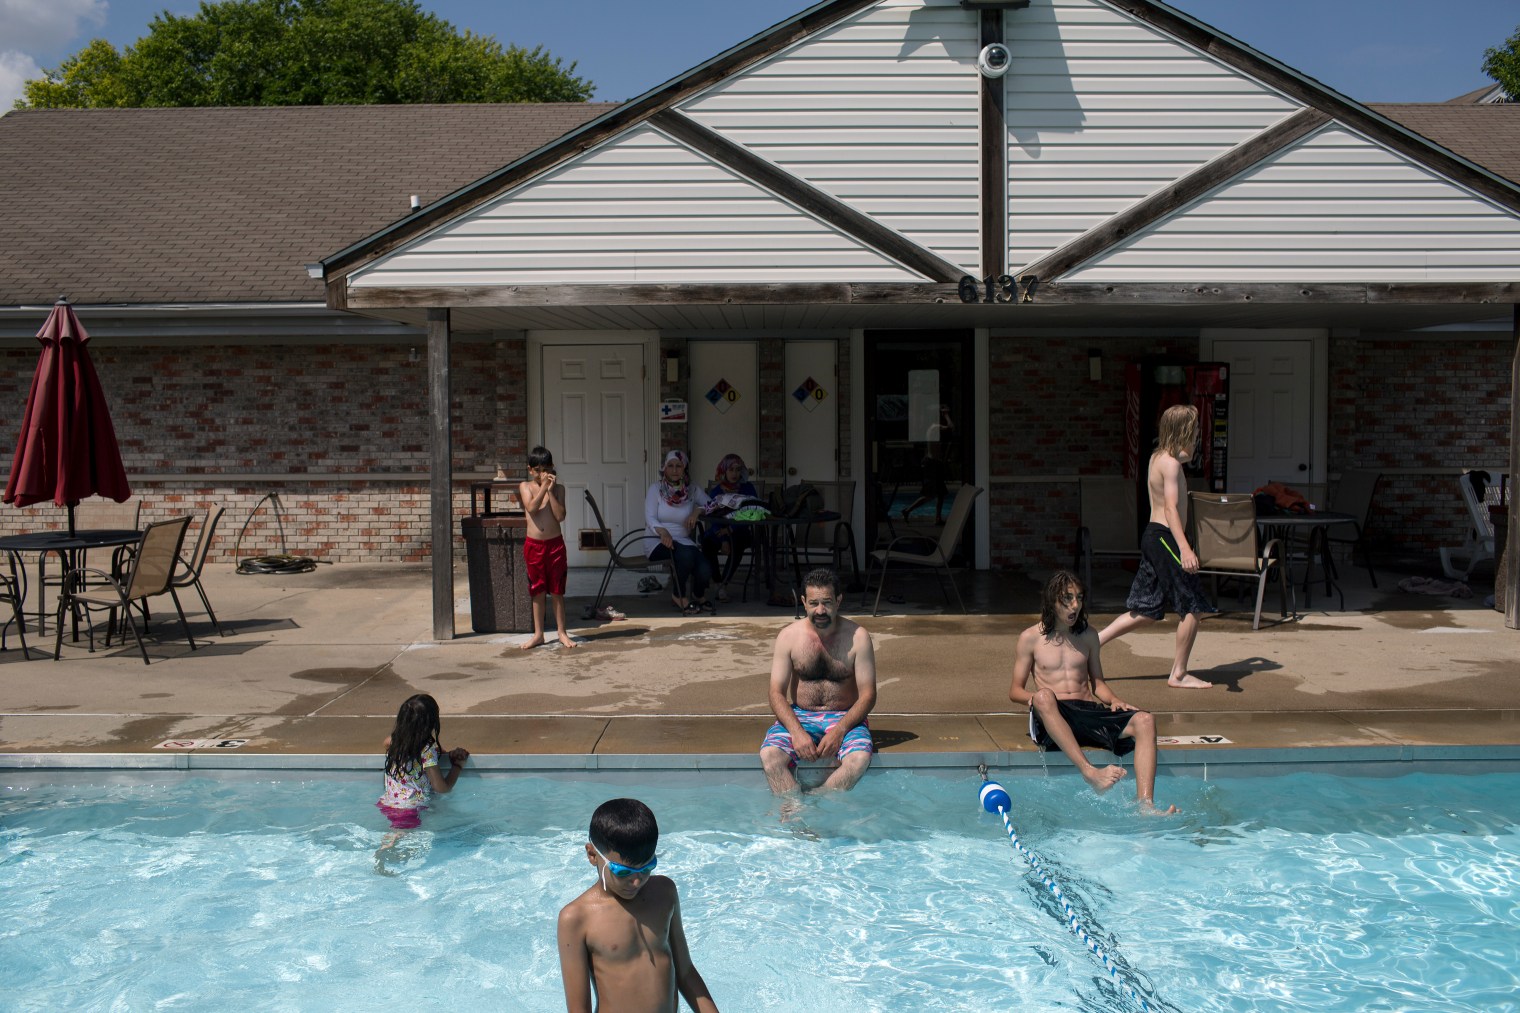 Abdul Fattah Tameem and his family enjoy the pool on a hot summer day at the family's new apartment complex in West Des Moines, a suburb of Des Moines, Iowa.